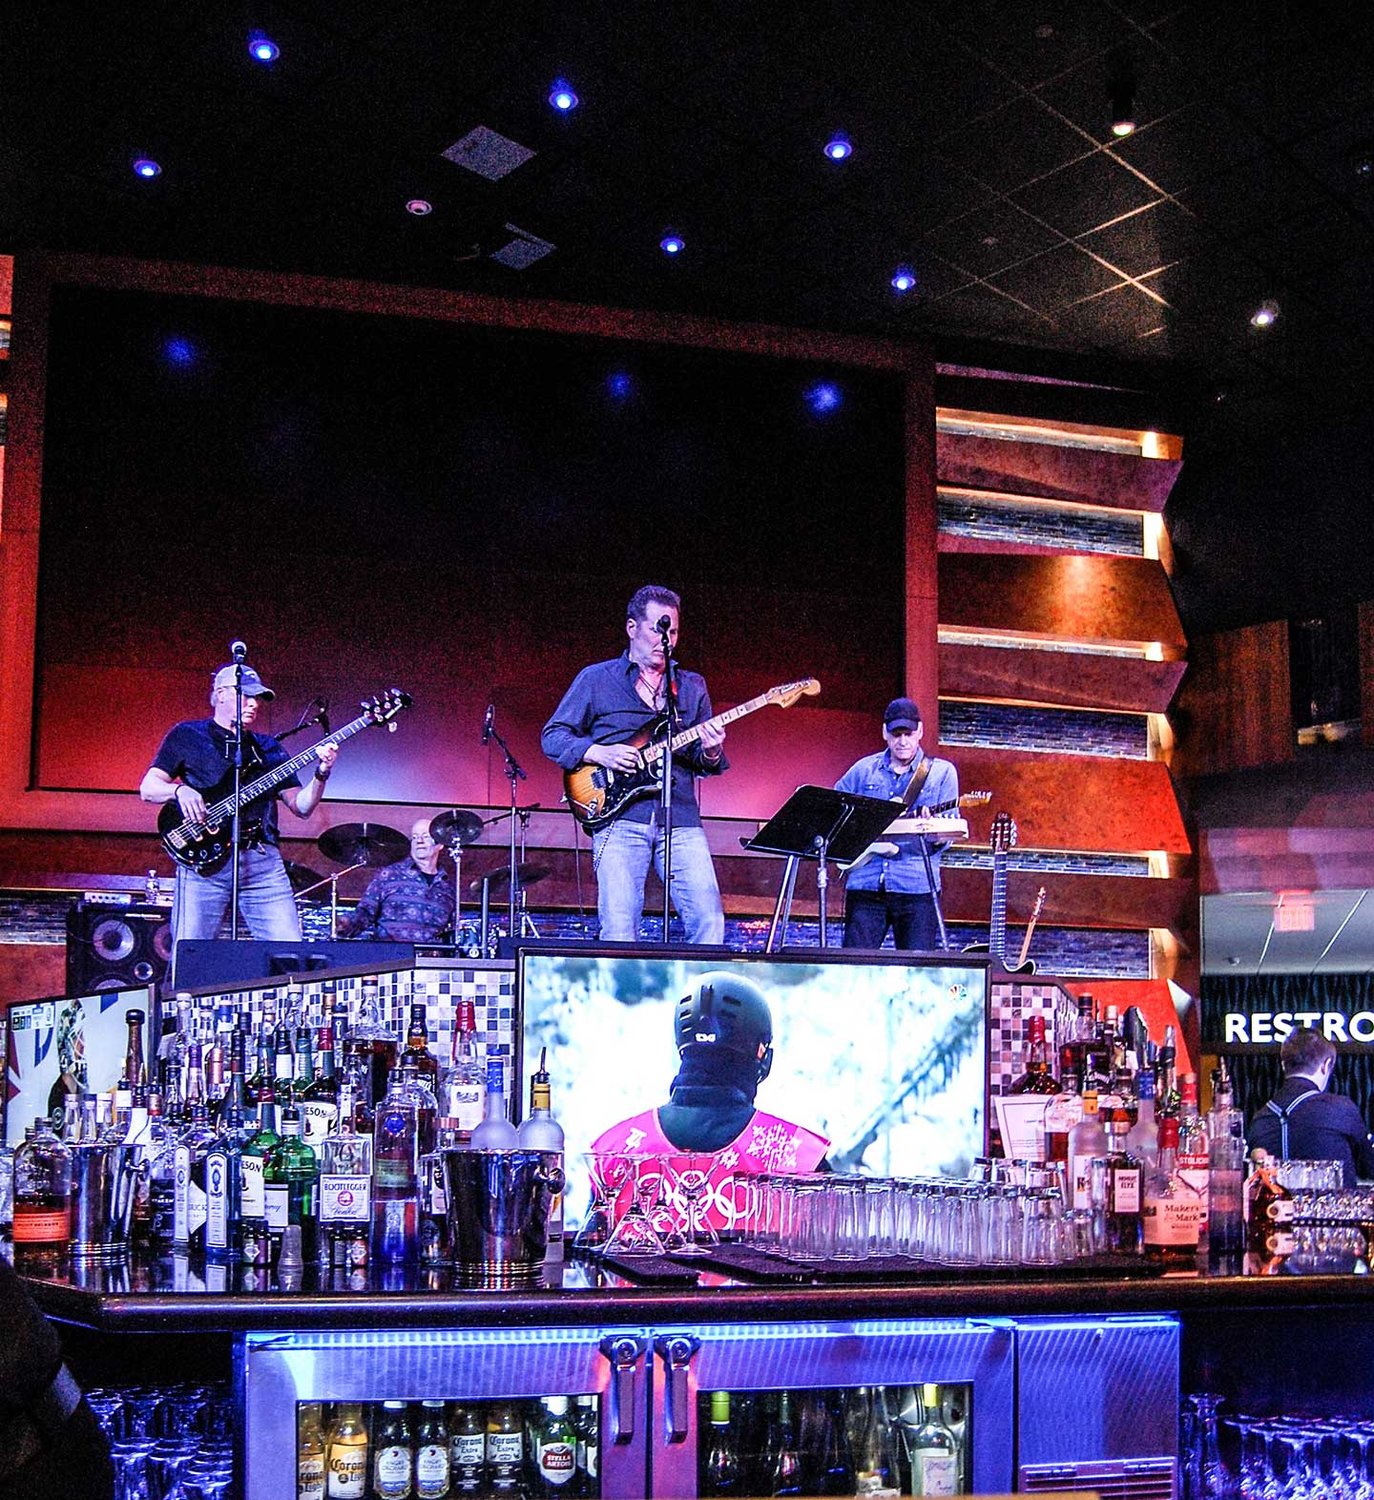 Perched high above the crowd at Bar 360 inside the casino at Resorts World Catskills, the Somerville Brothers played with their band as an appreciative crowd hollered in approval last Friday night.